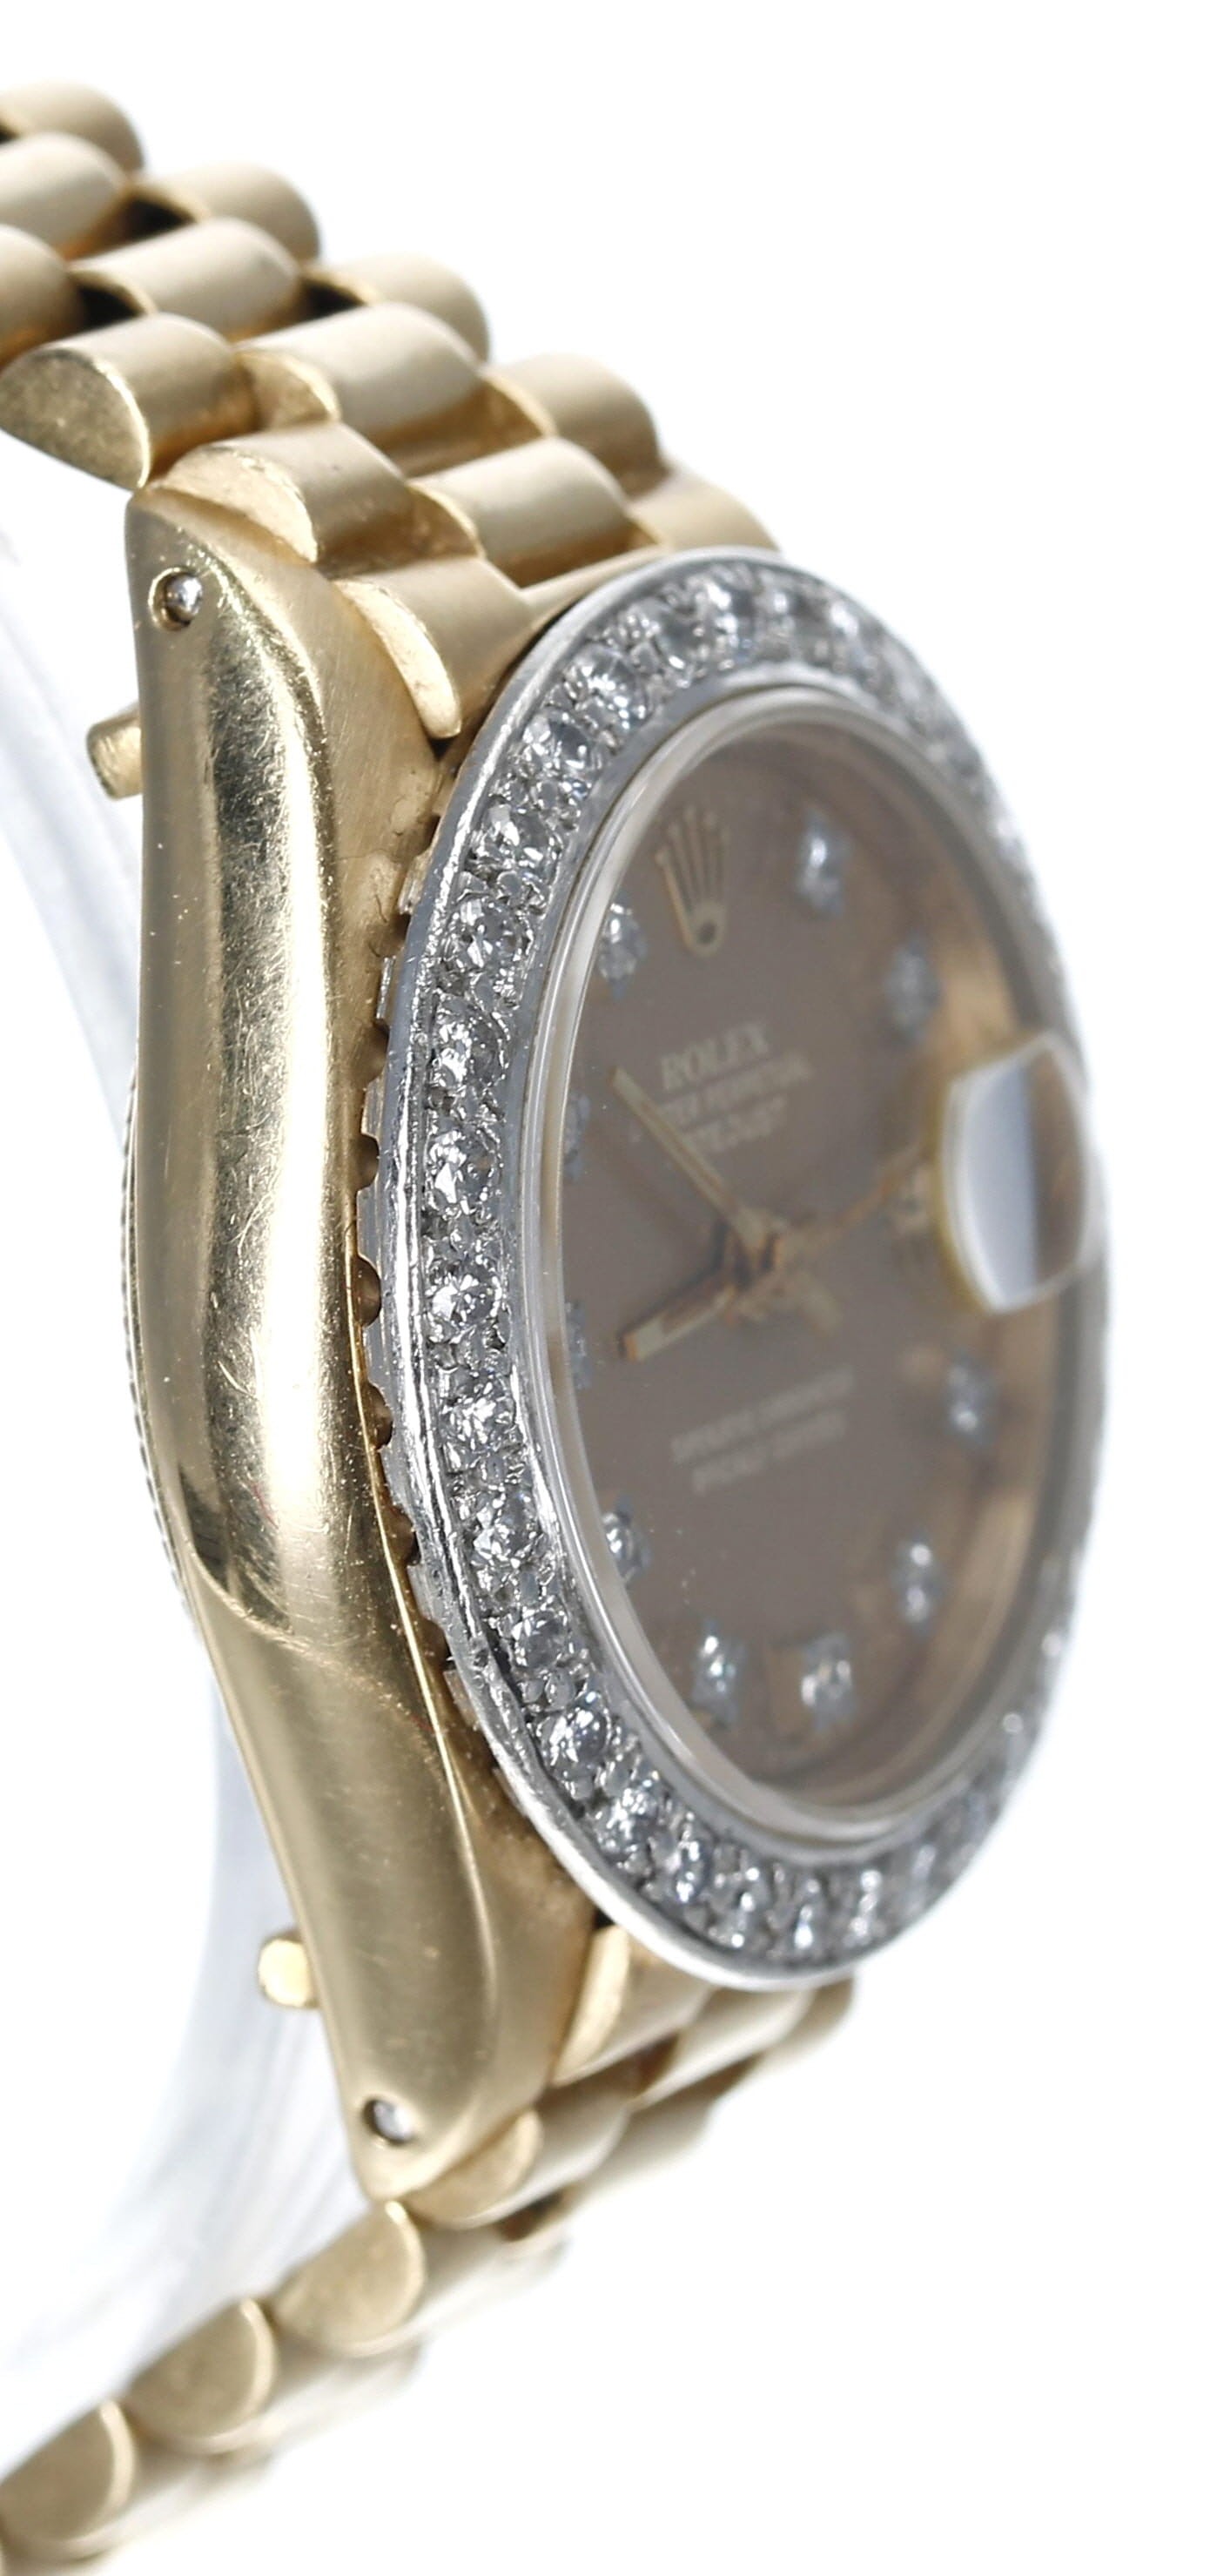 Rolex Oyster Perpetual Datejust 18ct diamond set lady's wristwatch, reference no. 6917, serial no. - Image 4 of 6